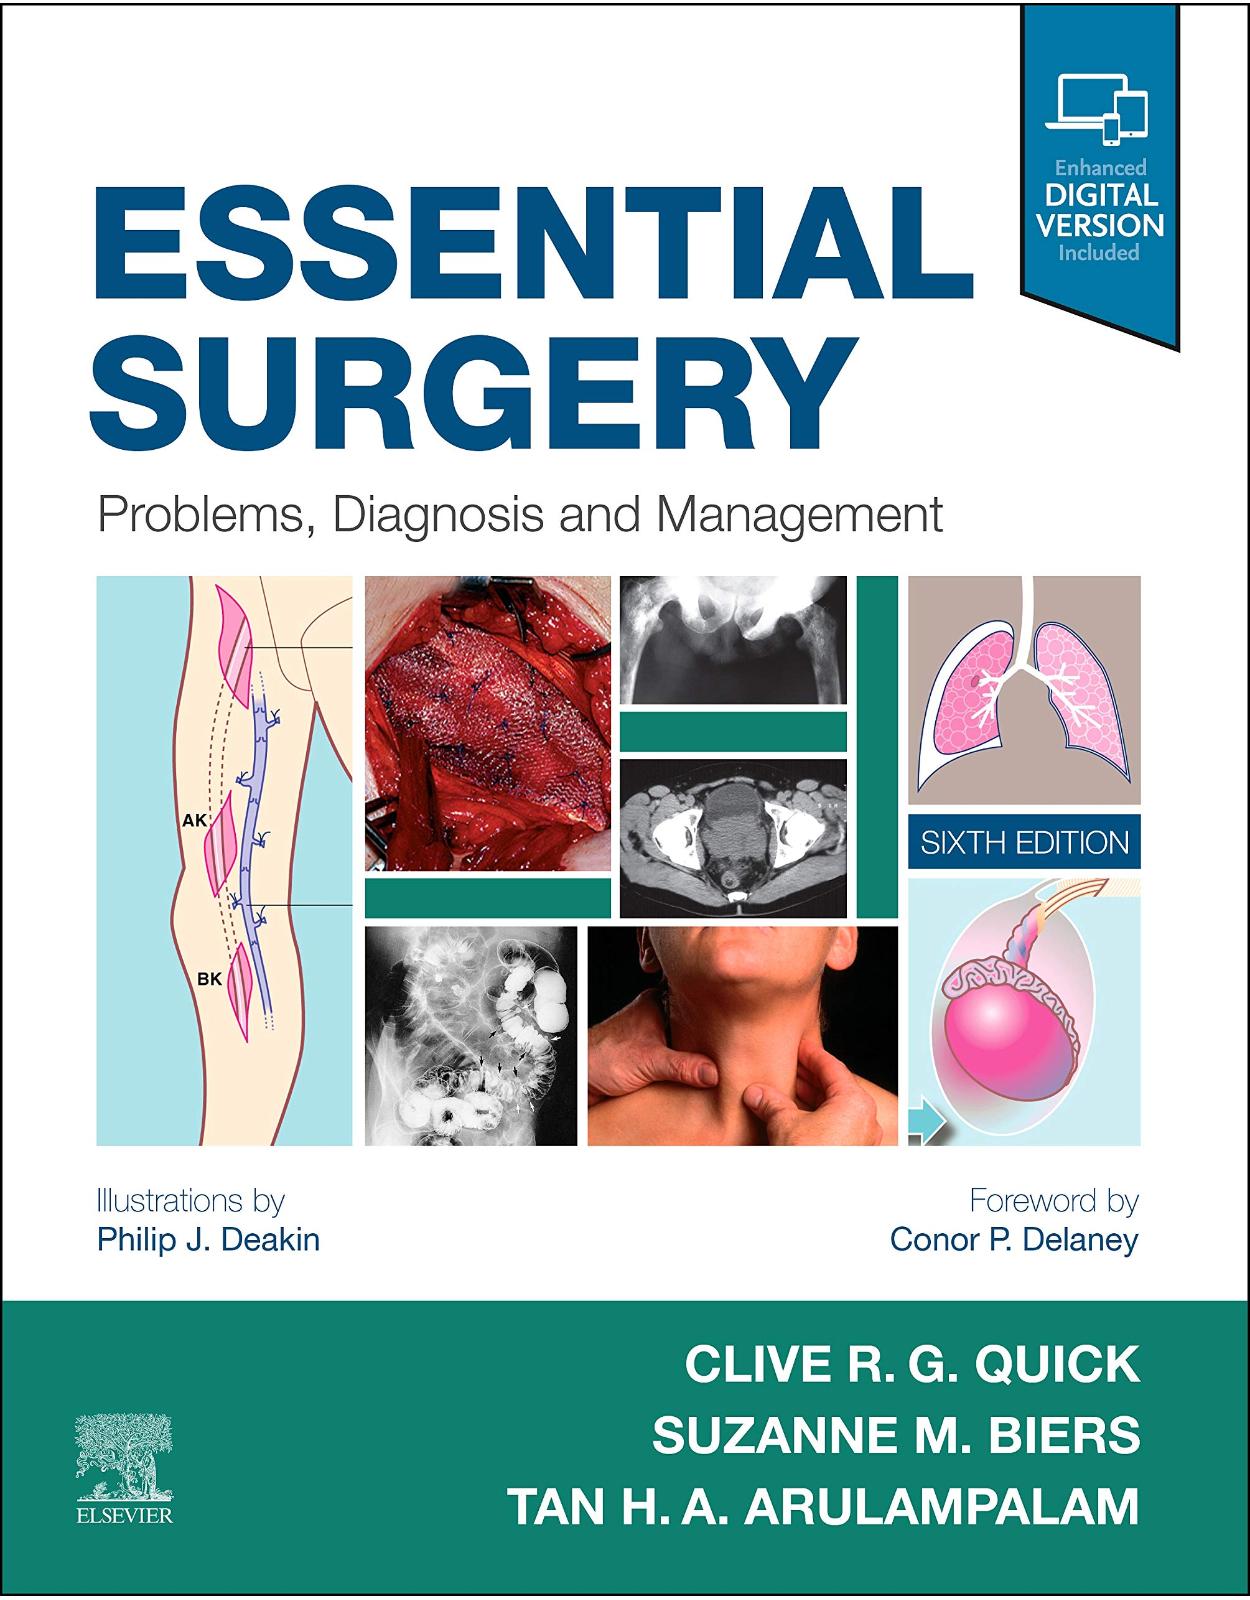 Essential Surgery: Problems, Diagnosis and Management